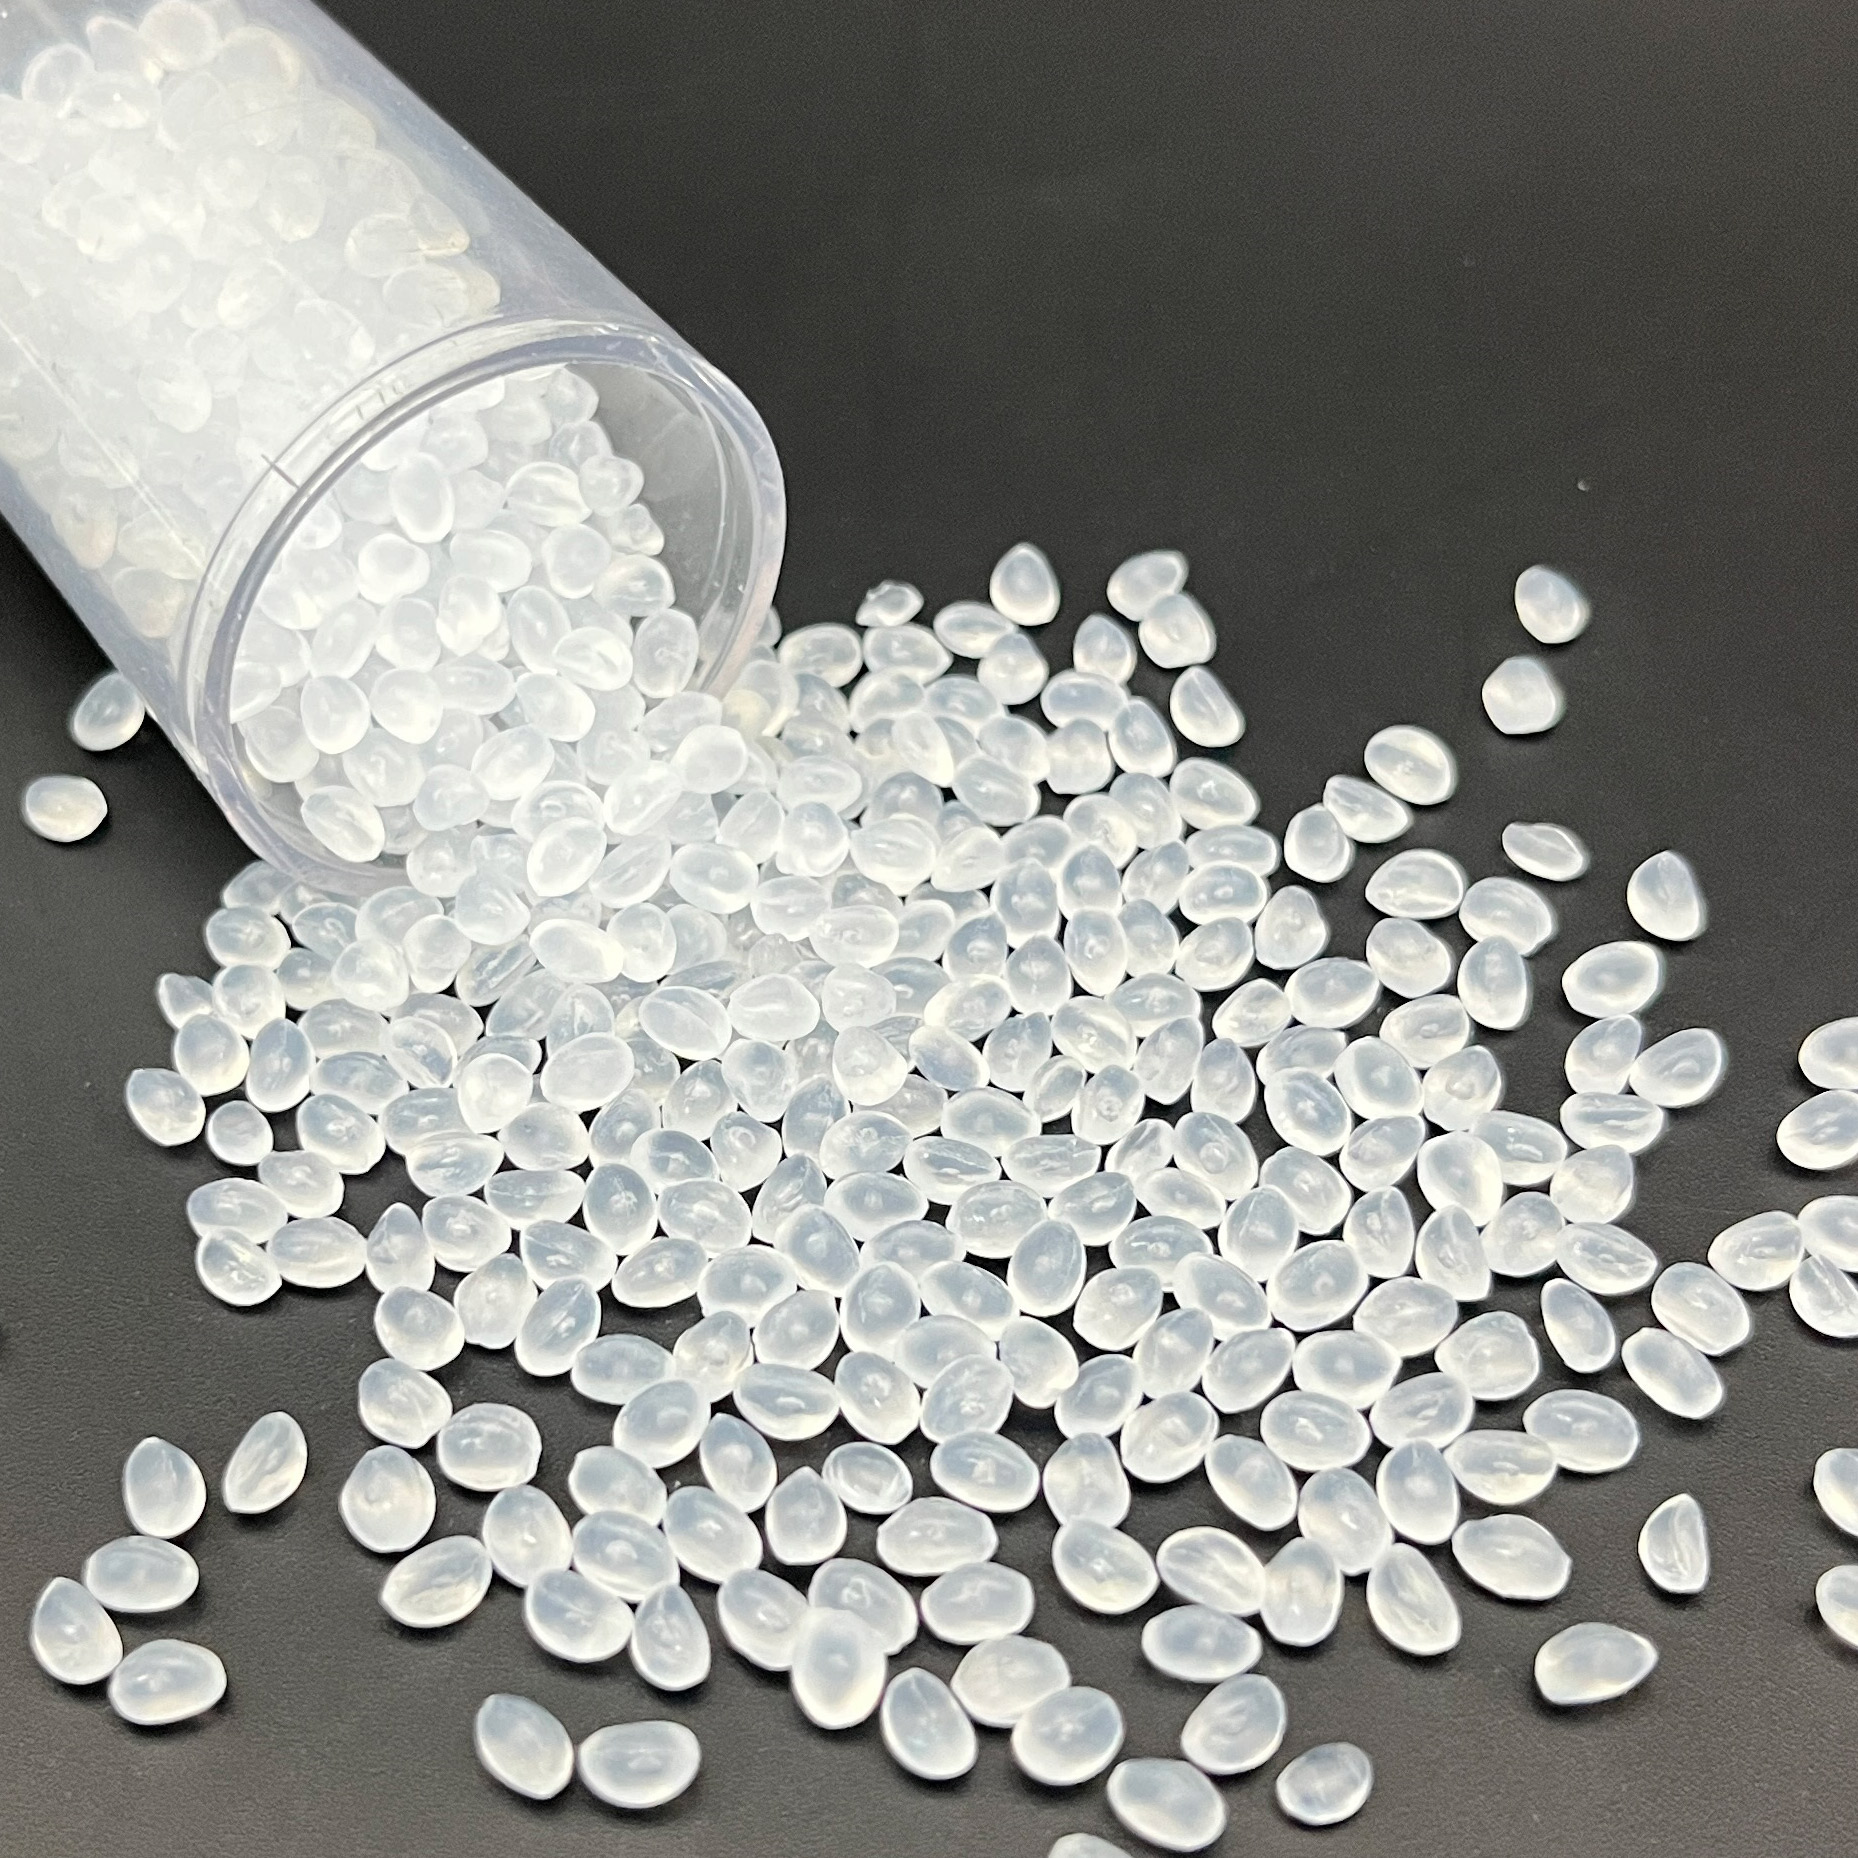 pp polypropylene homopolymer and copolymerisation difference